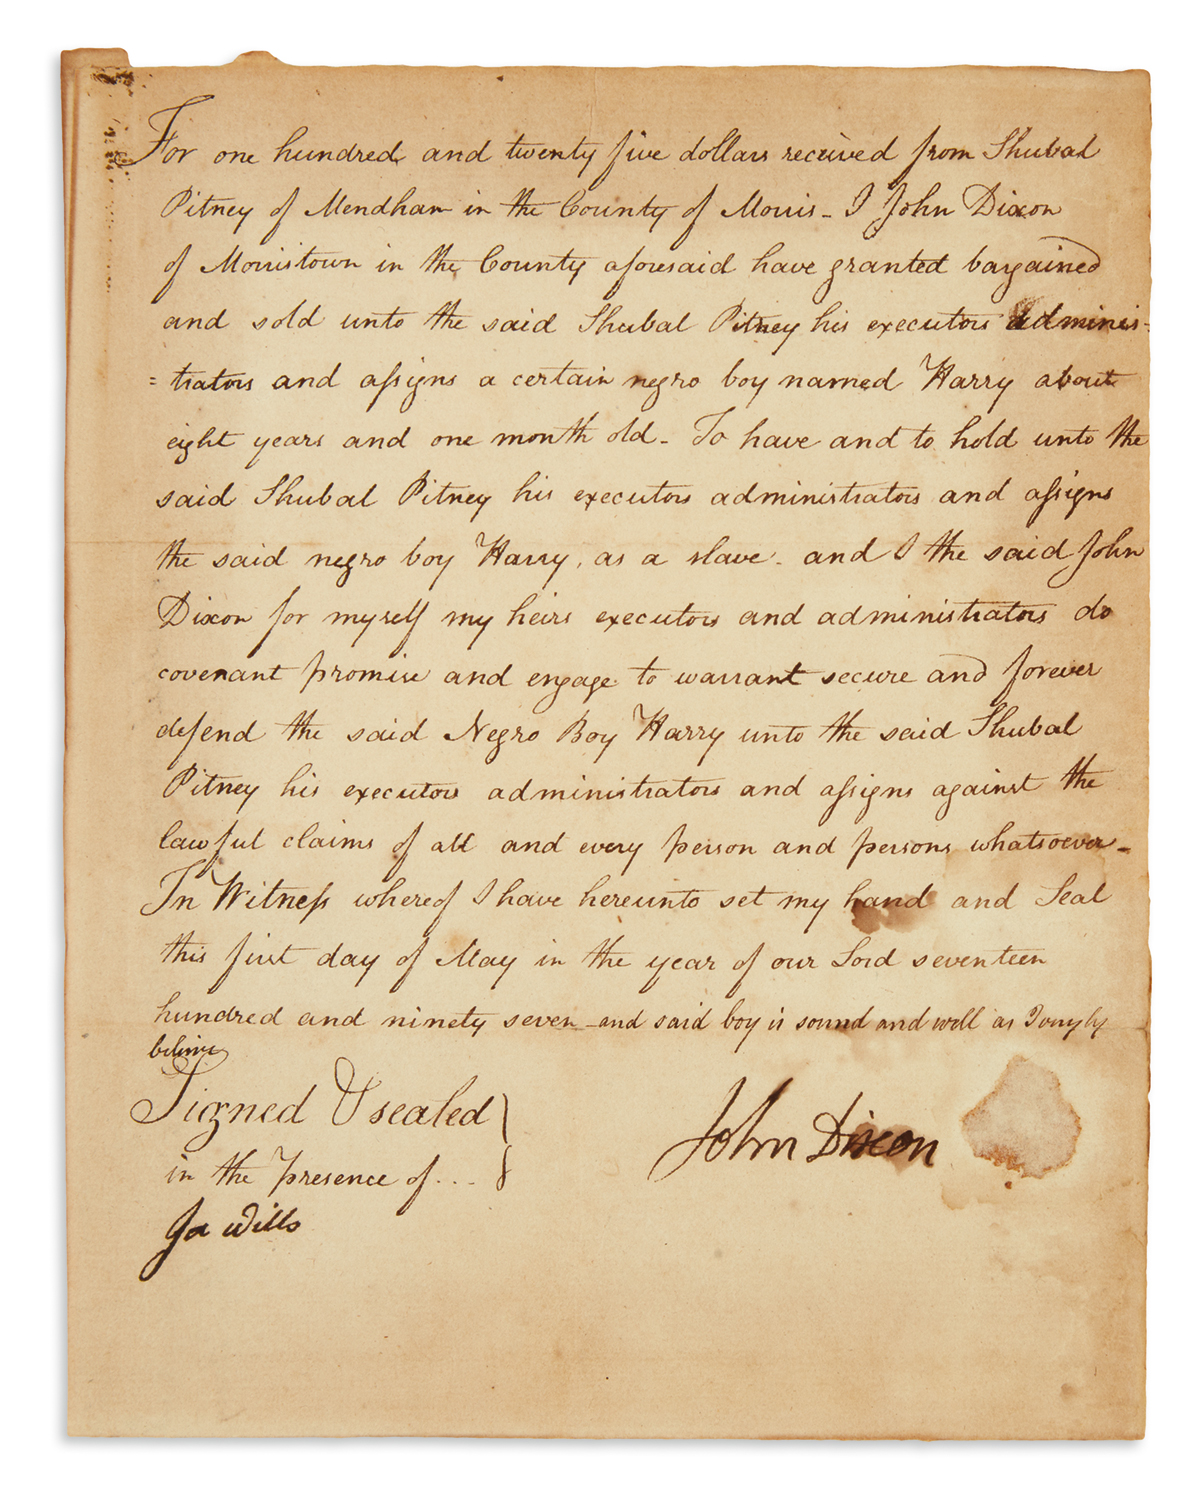 (SLAVERY AND ABOLITION.) Bill of sale for a negro boy named Harry in New Jersey.